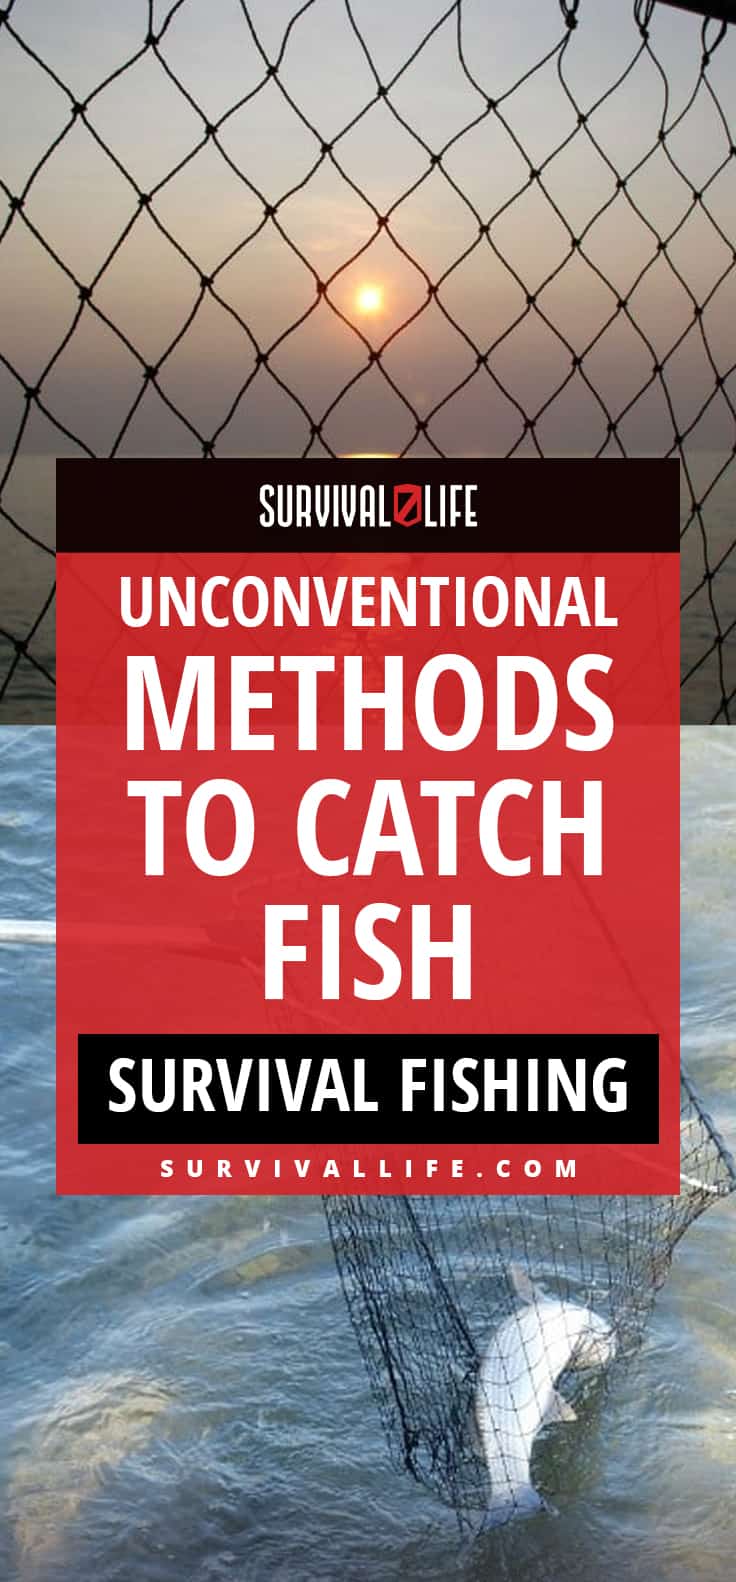 Survival Fishing | Unconventional Methods To Catch Fish